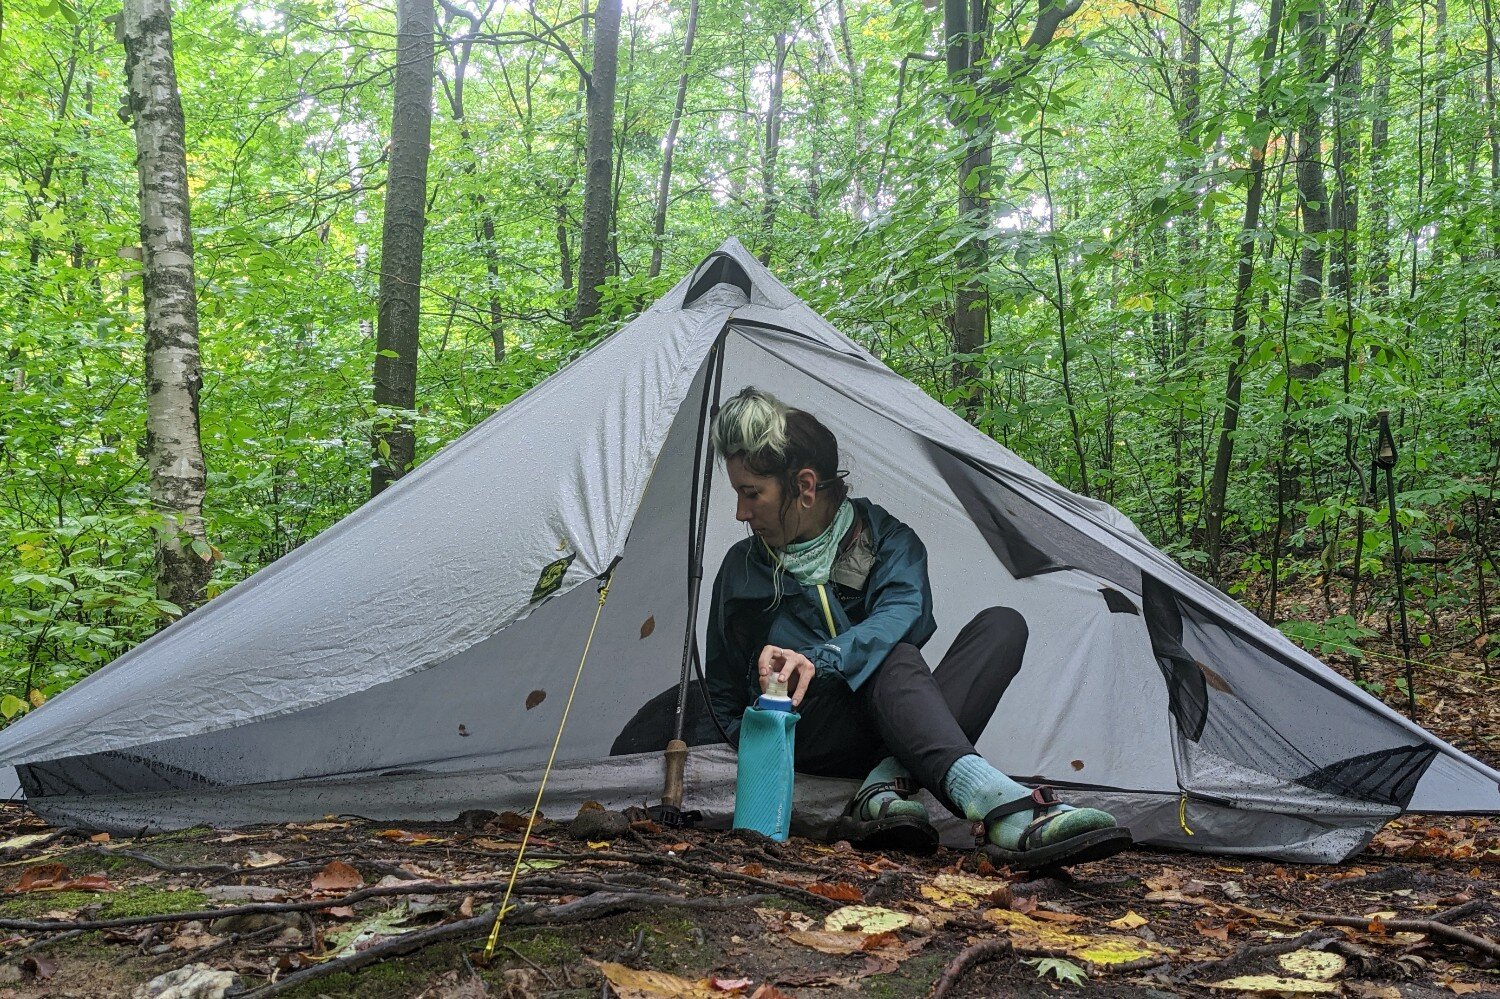 The Lunar Solo is one of our absolute favorite tents for solo hikers